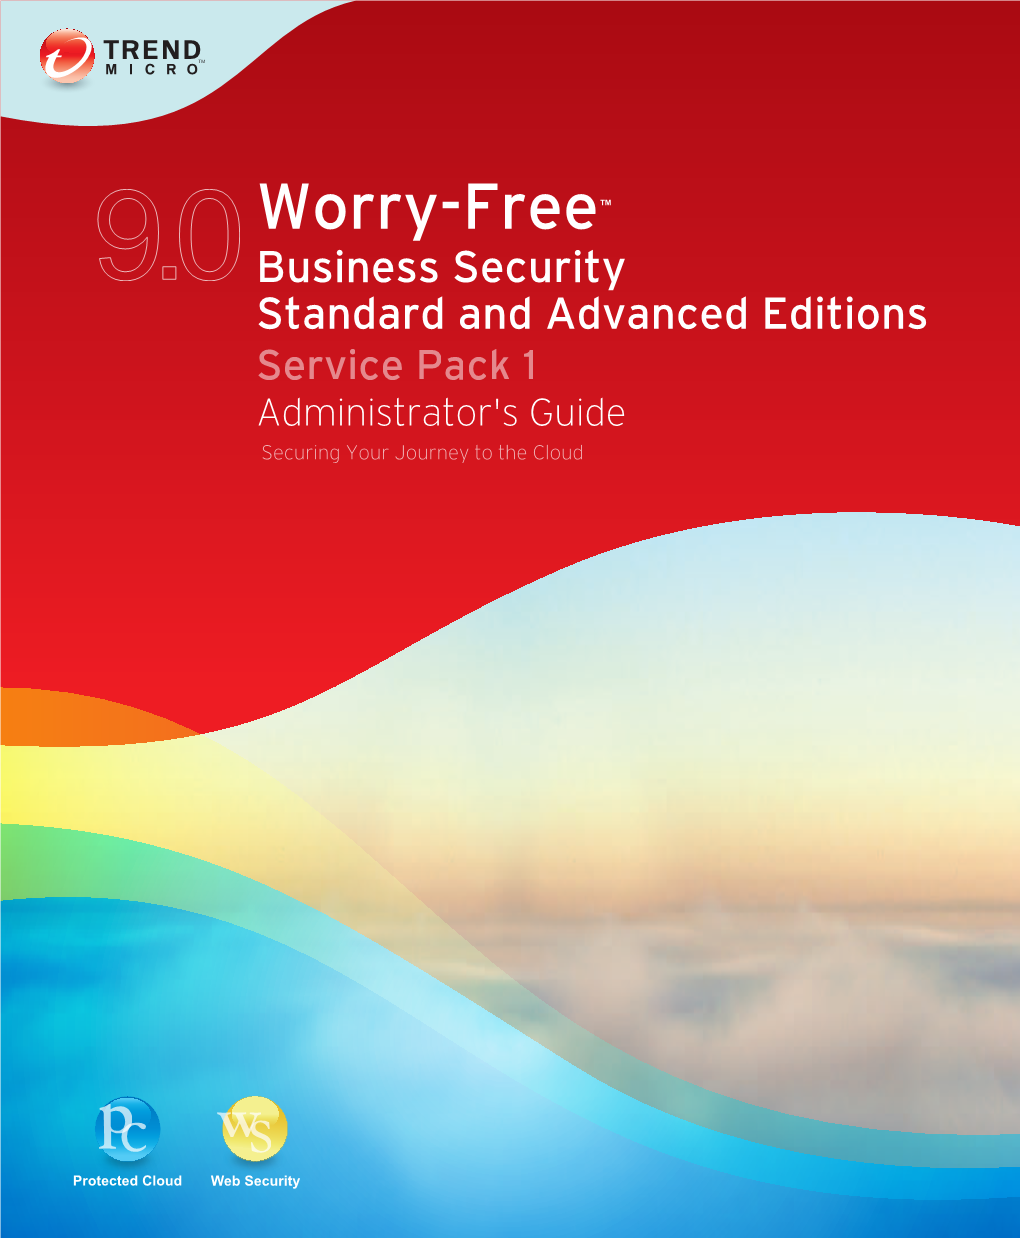 Trend Micro Worry-Free Business Security 9.0 SP1 Administrator's